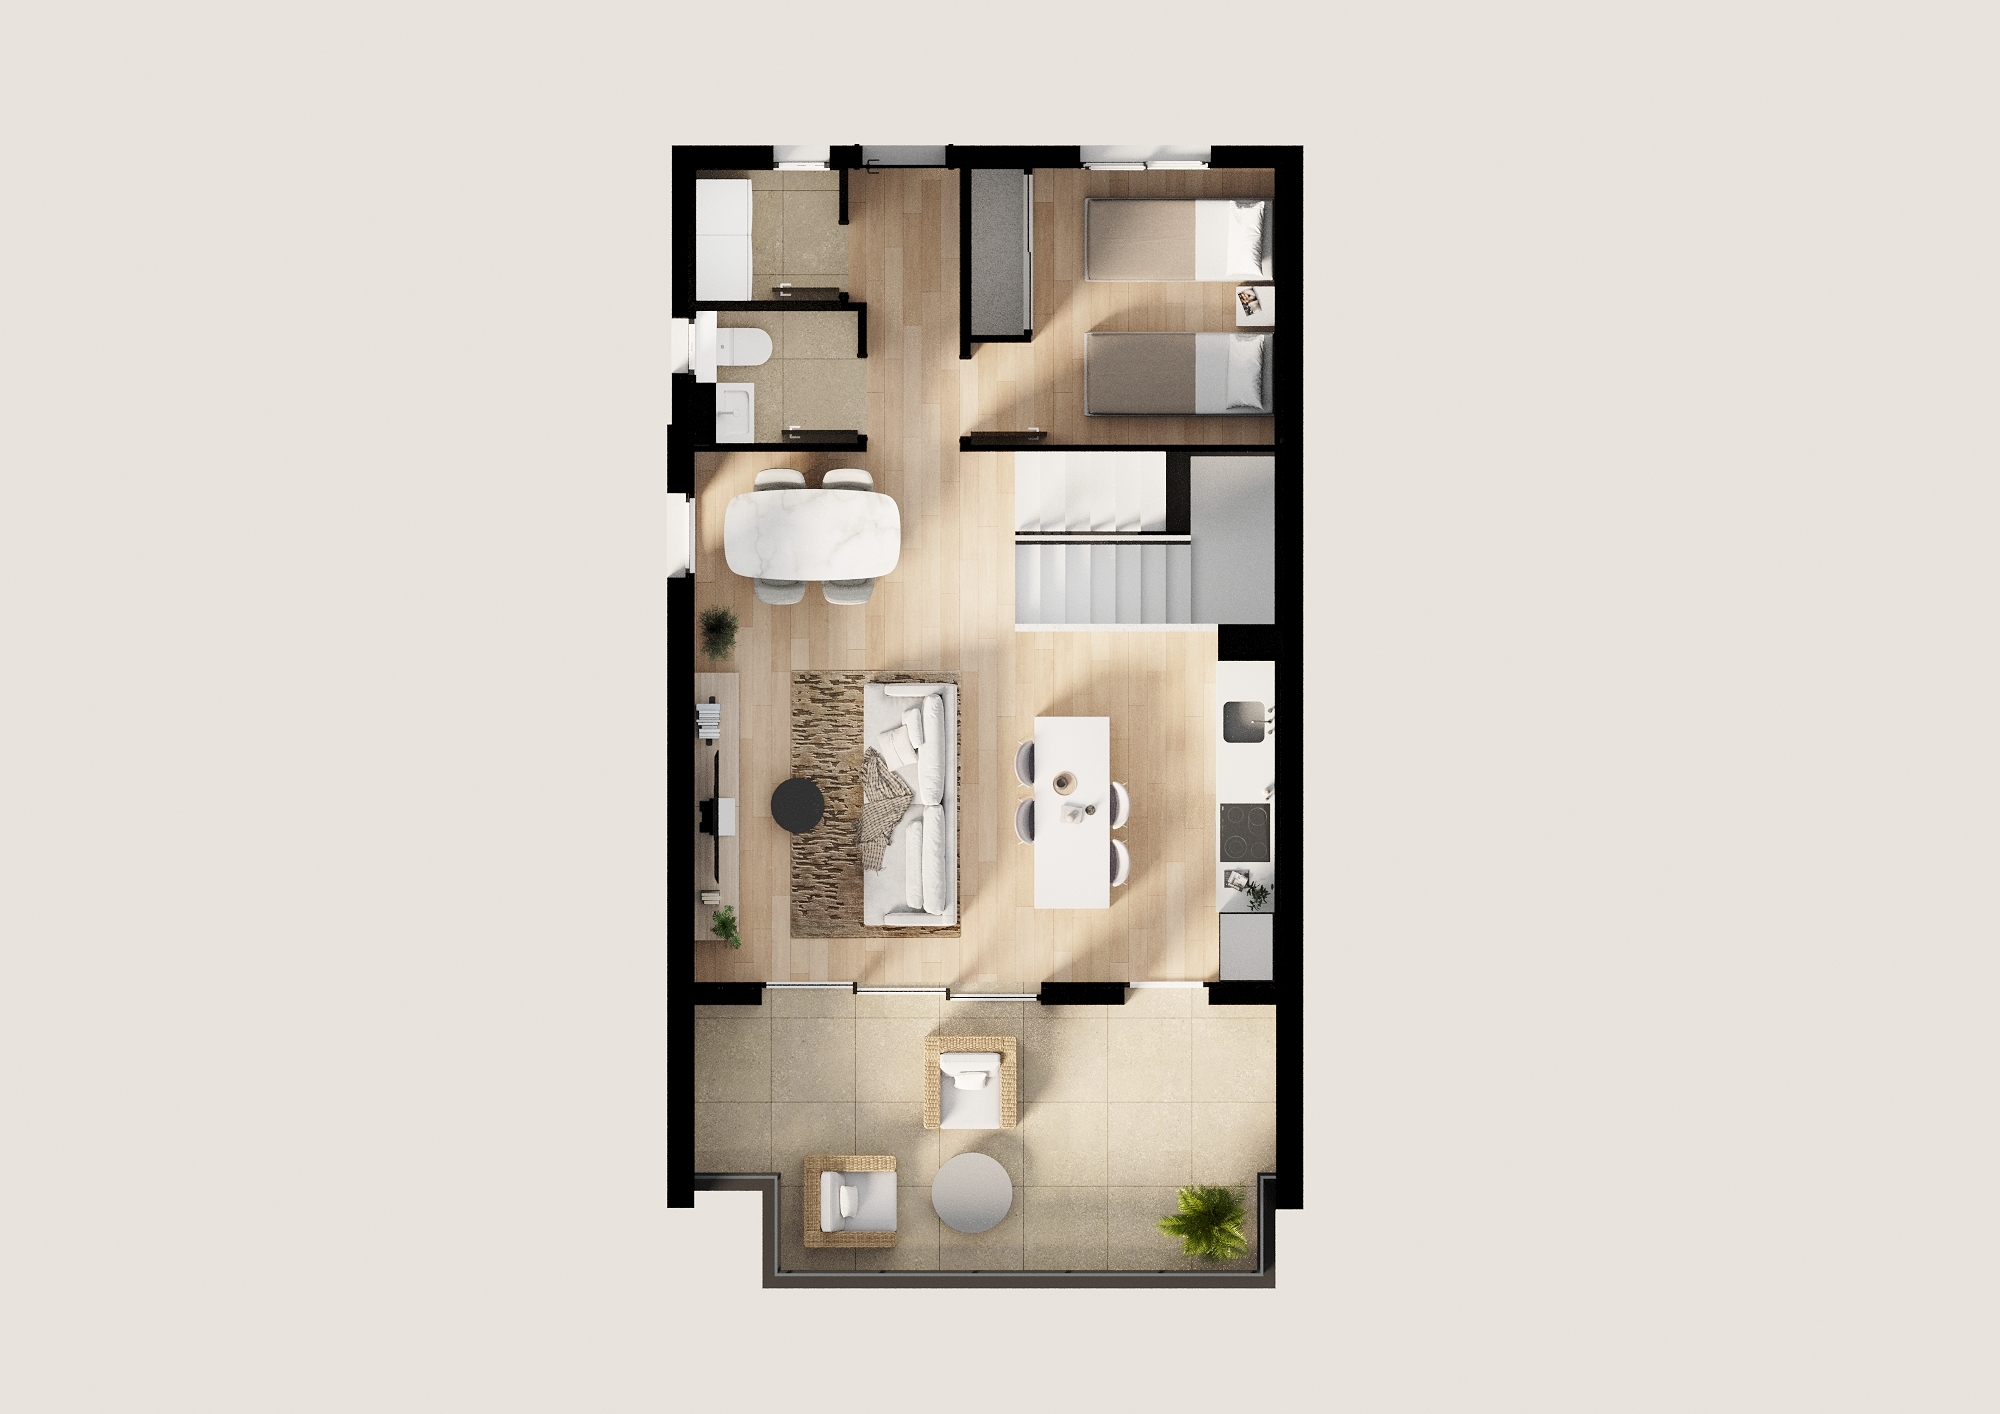 Finestrat: Terraced house in a quiet area